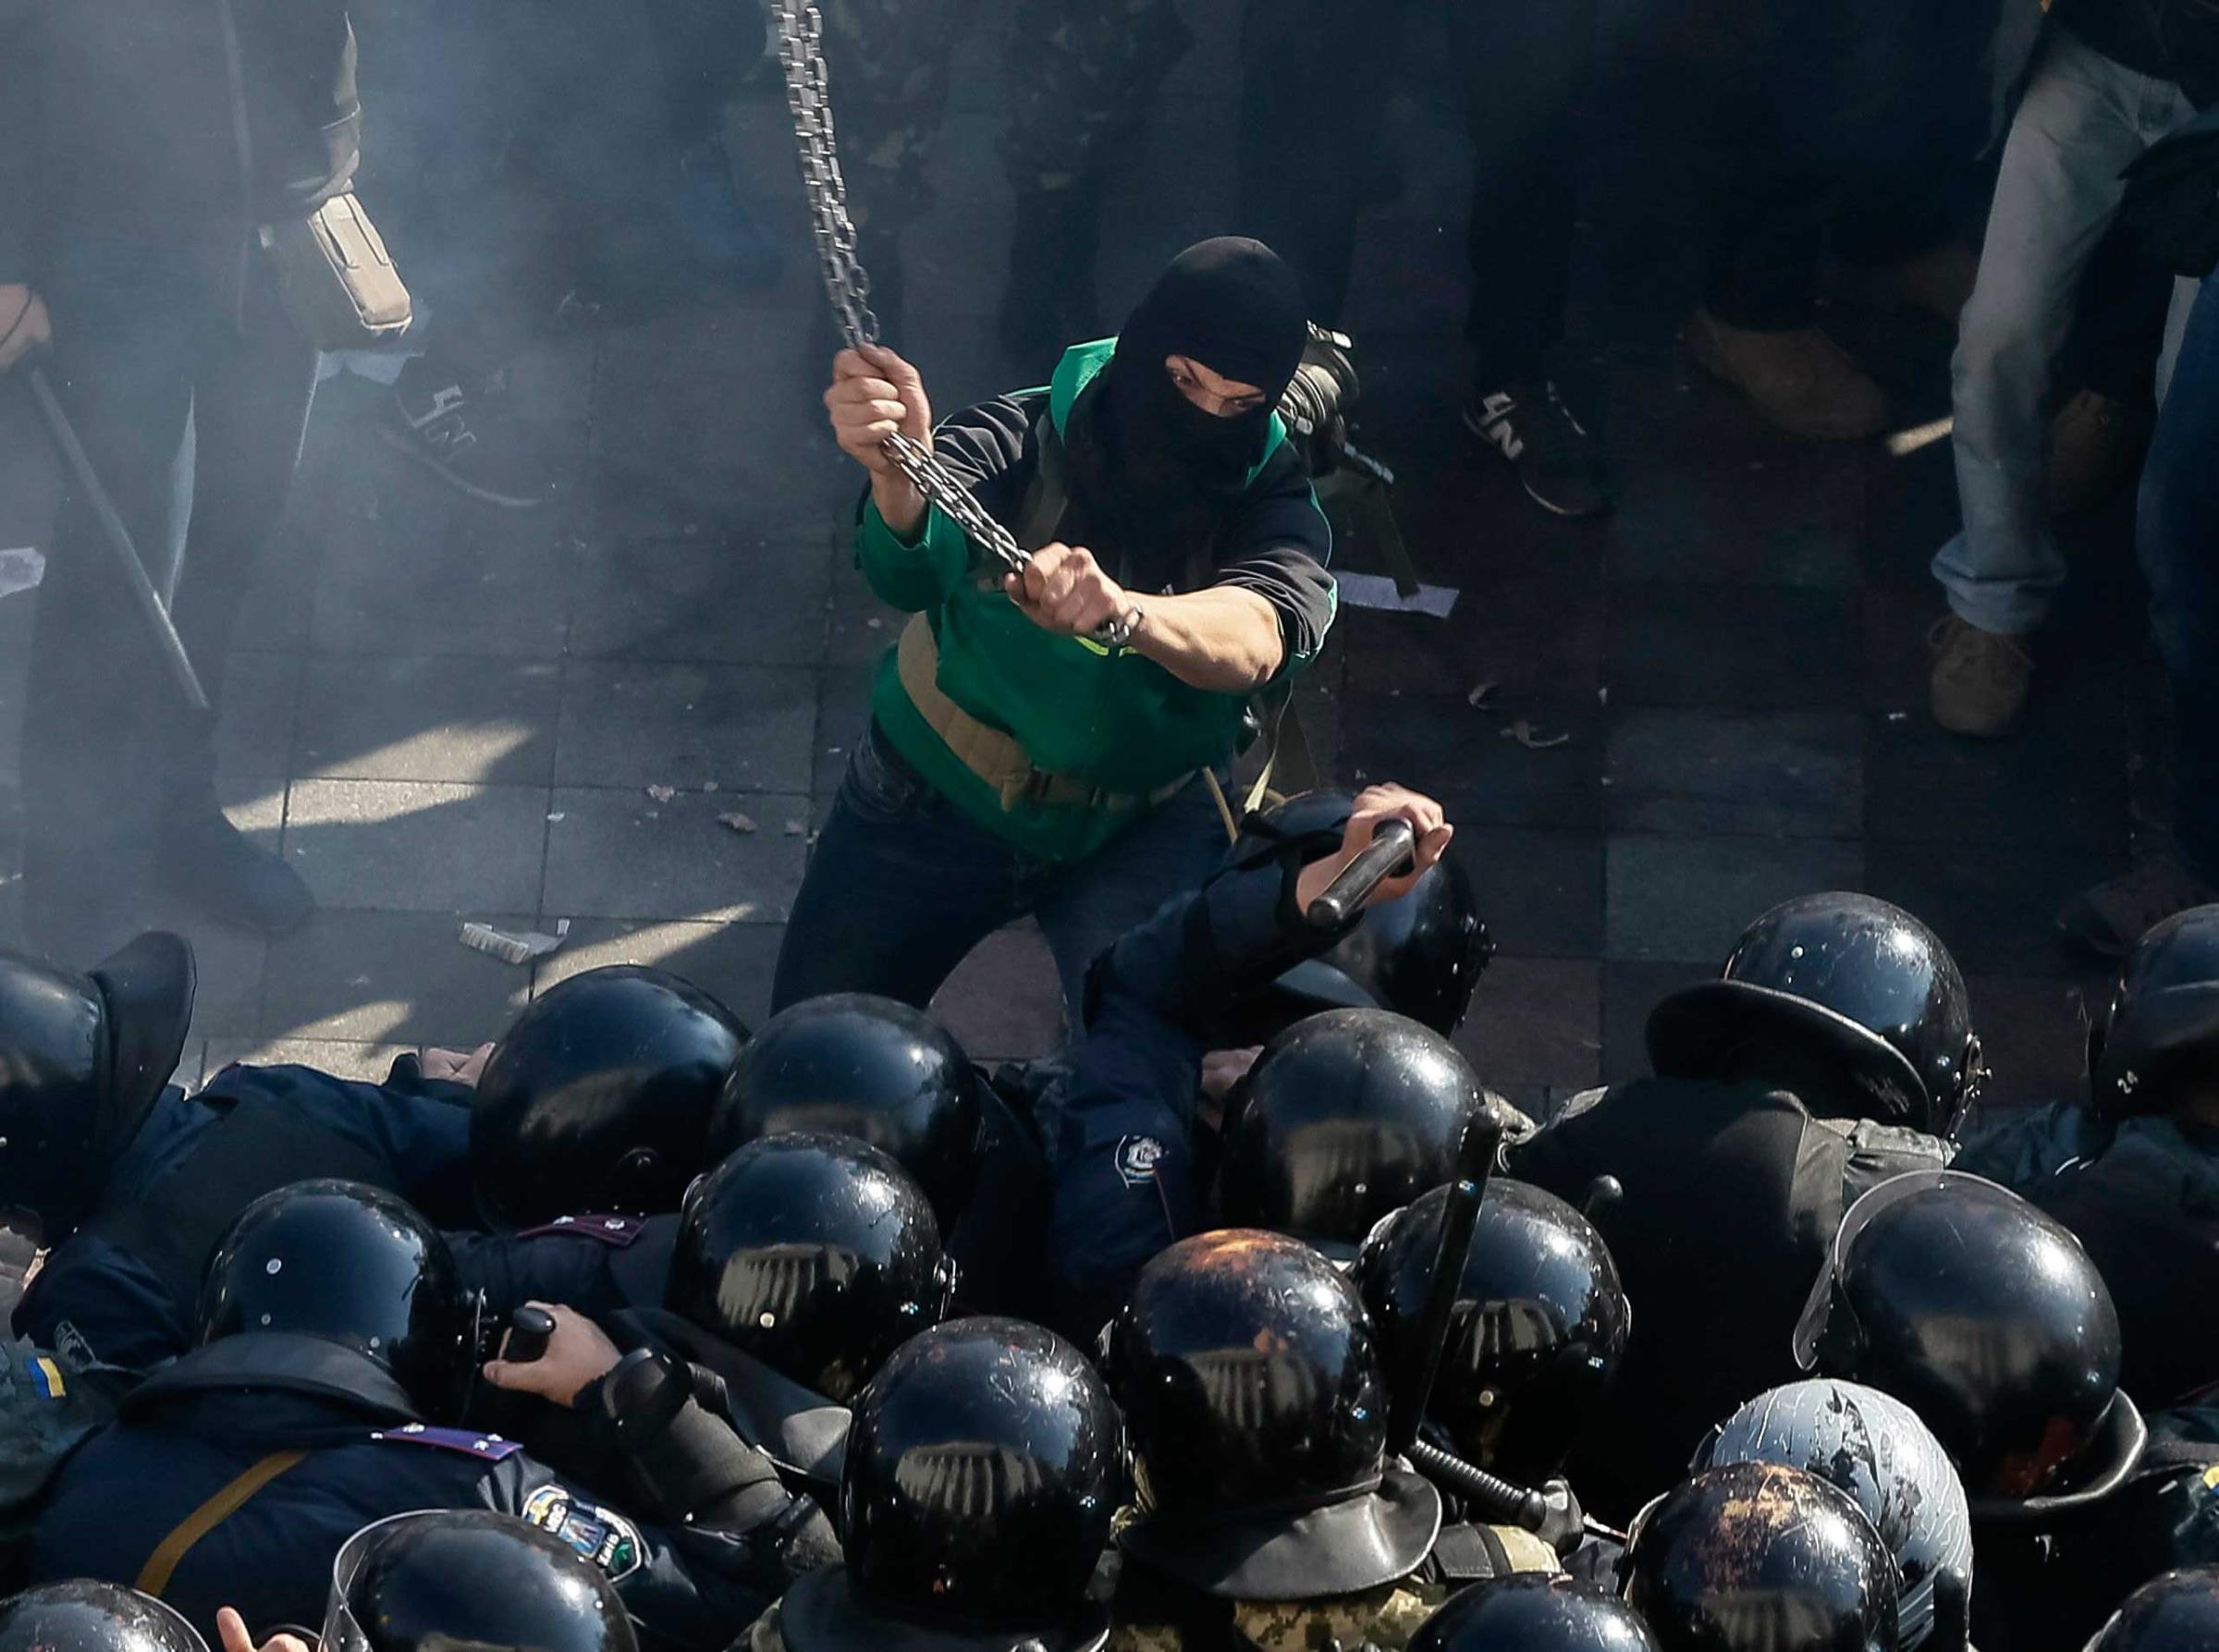 A radical protester clashes with law enforcement members on the Day of Ukrainian Cossacks during a rally near the parliament building in Kiev